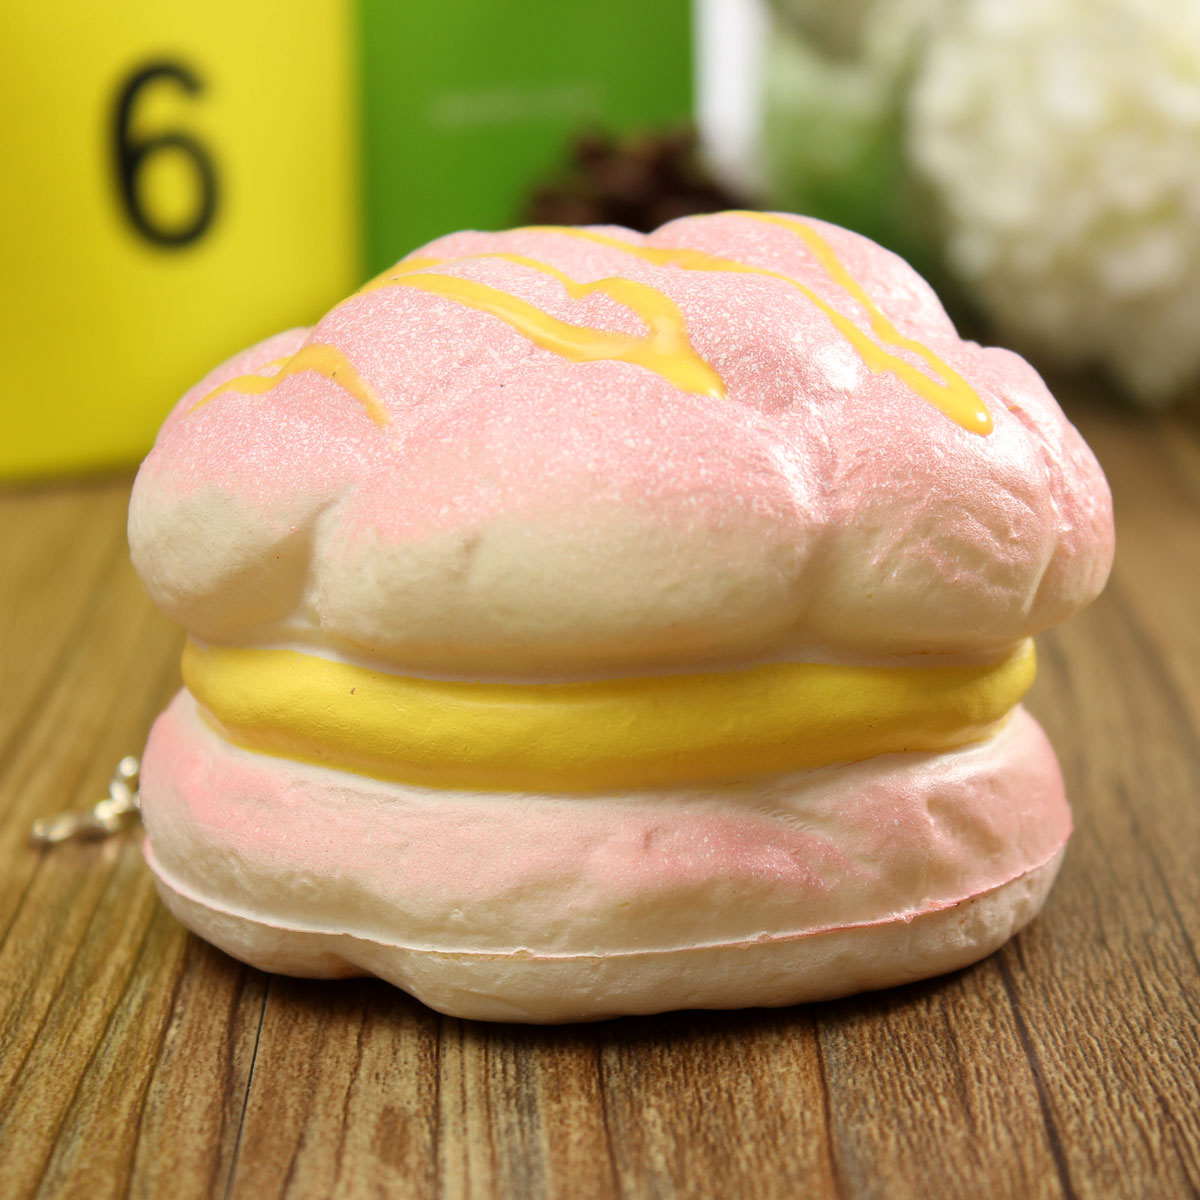 Squishy-Cell-Phone-Charms-Soft-Cream-Bread-Bag-Straps-Hand-Pillow-1070525-1